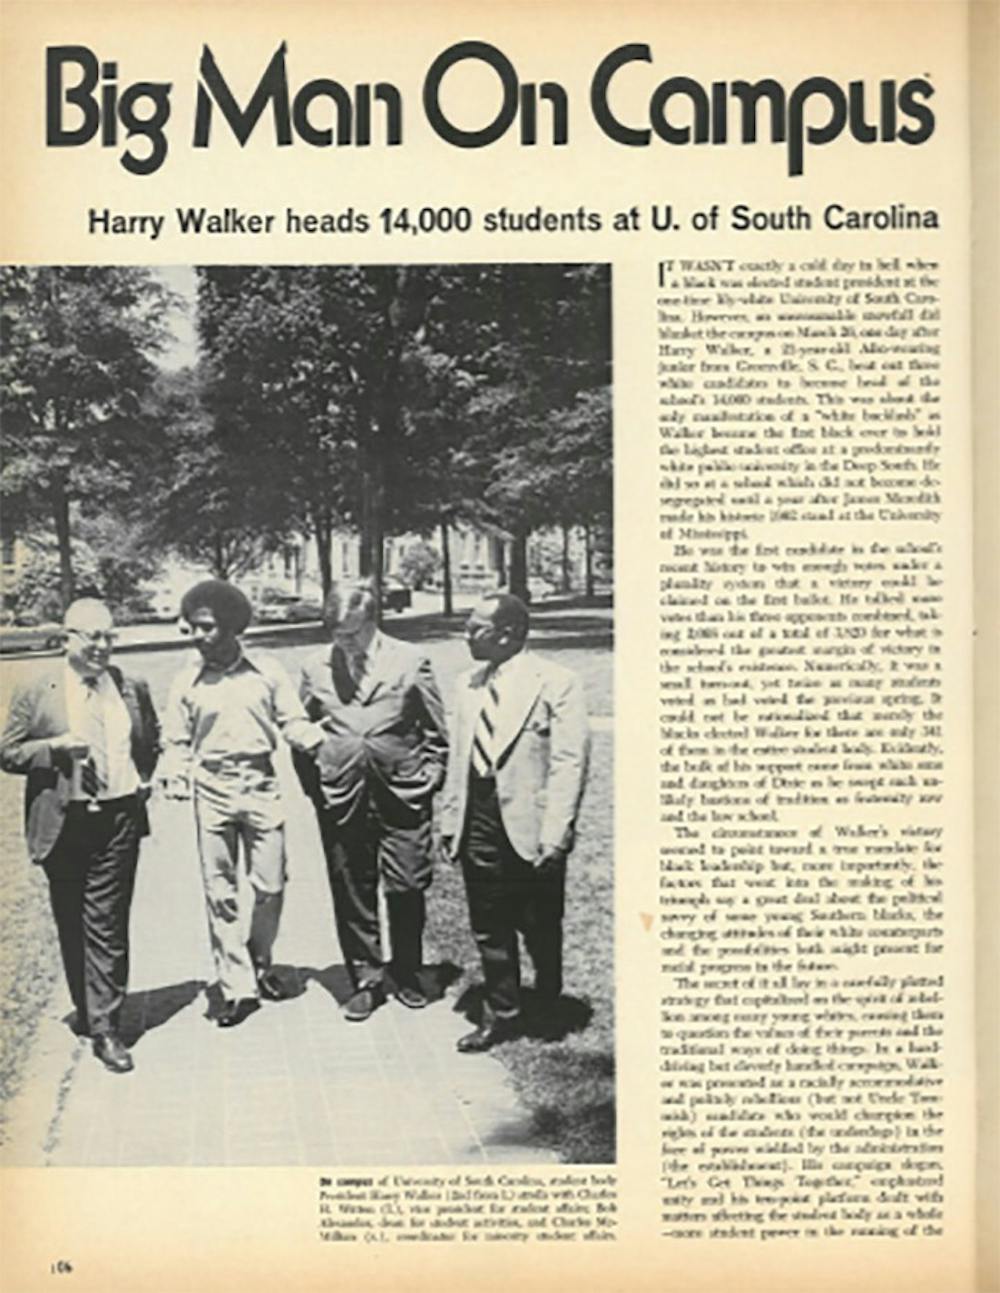 An article in EBONY magazine featured Walker during his time at USC. EBONY magazine focuses on news, culture and entertainment specifically focused towards Black Americans.